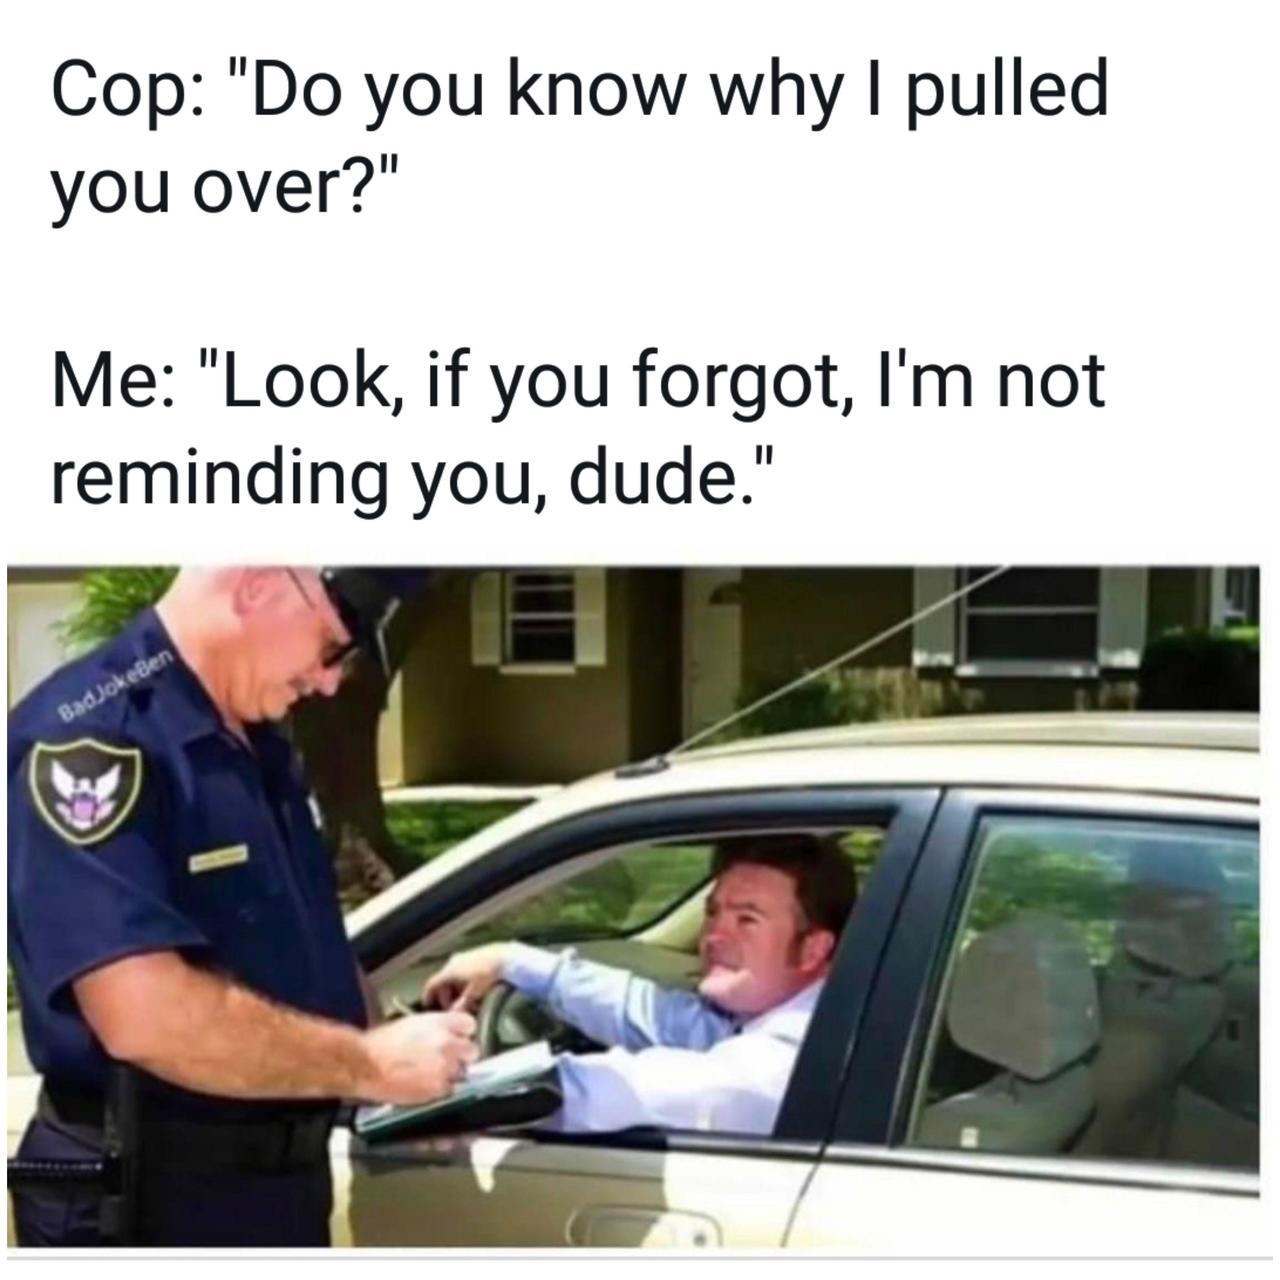 whose car is this meme - Cop "Do you know why I pulled you over?" Me "Look, if you forgot, I'm not reminding you, dude." doke